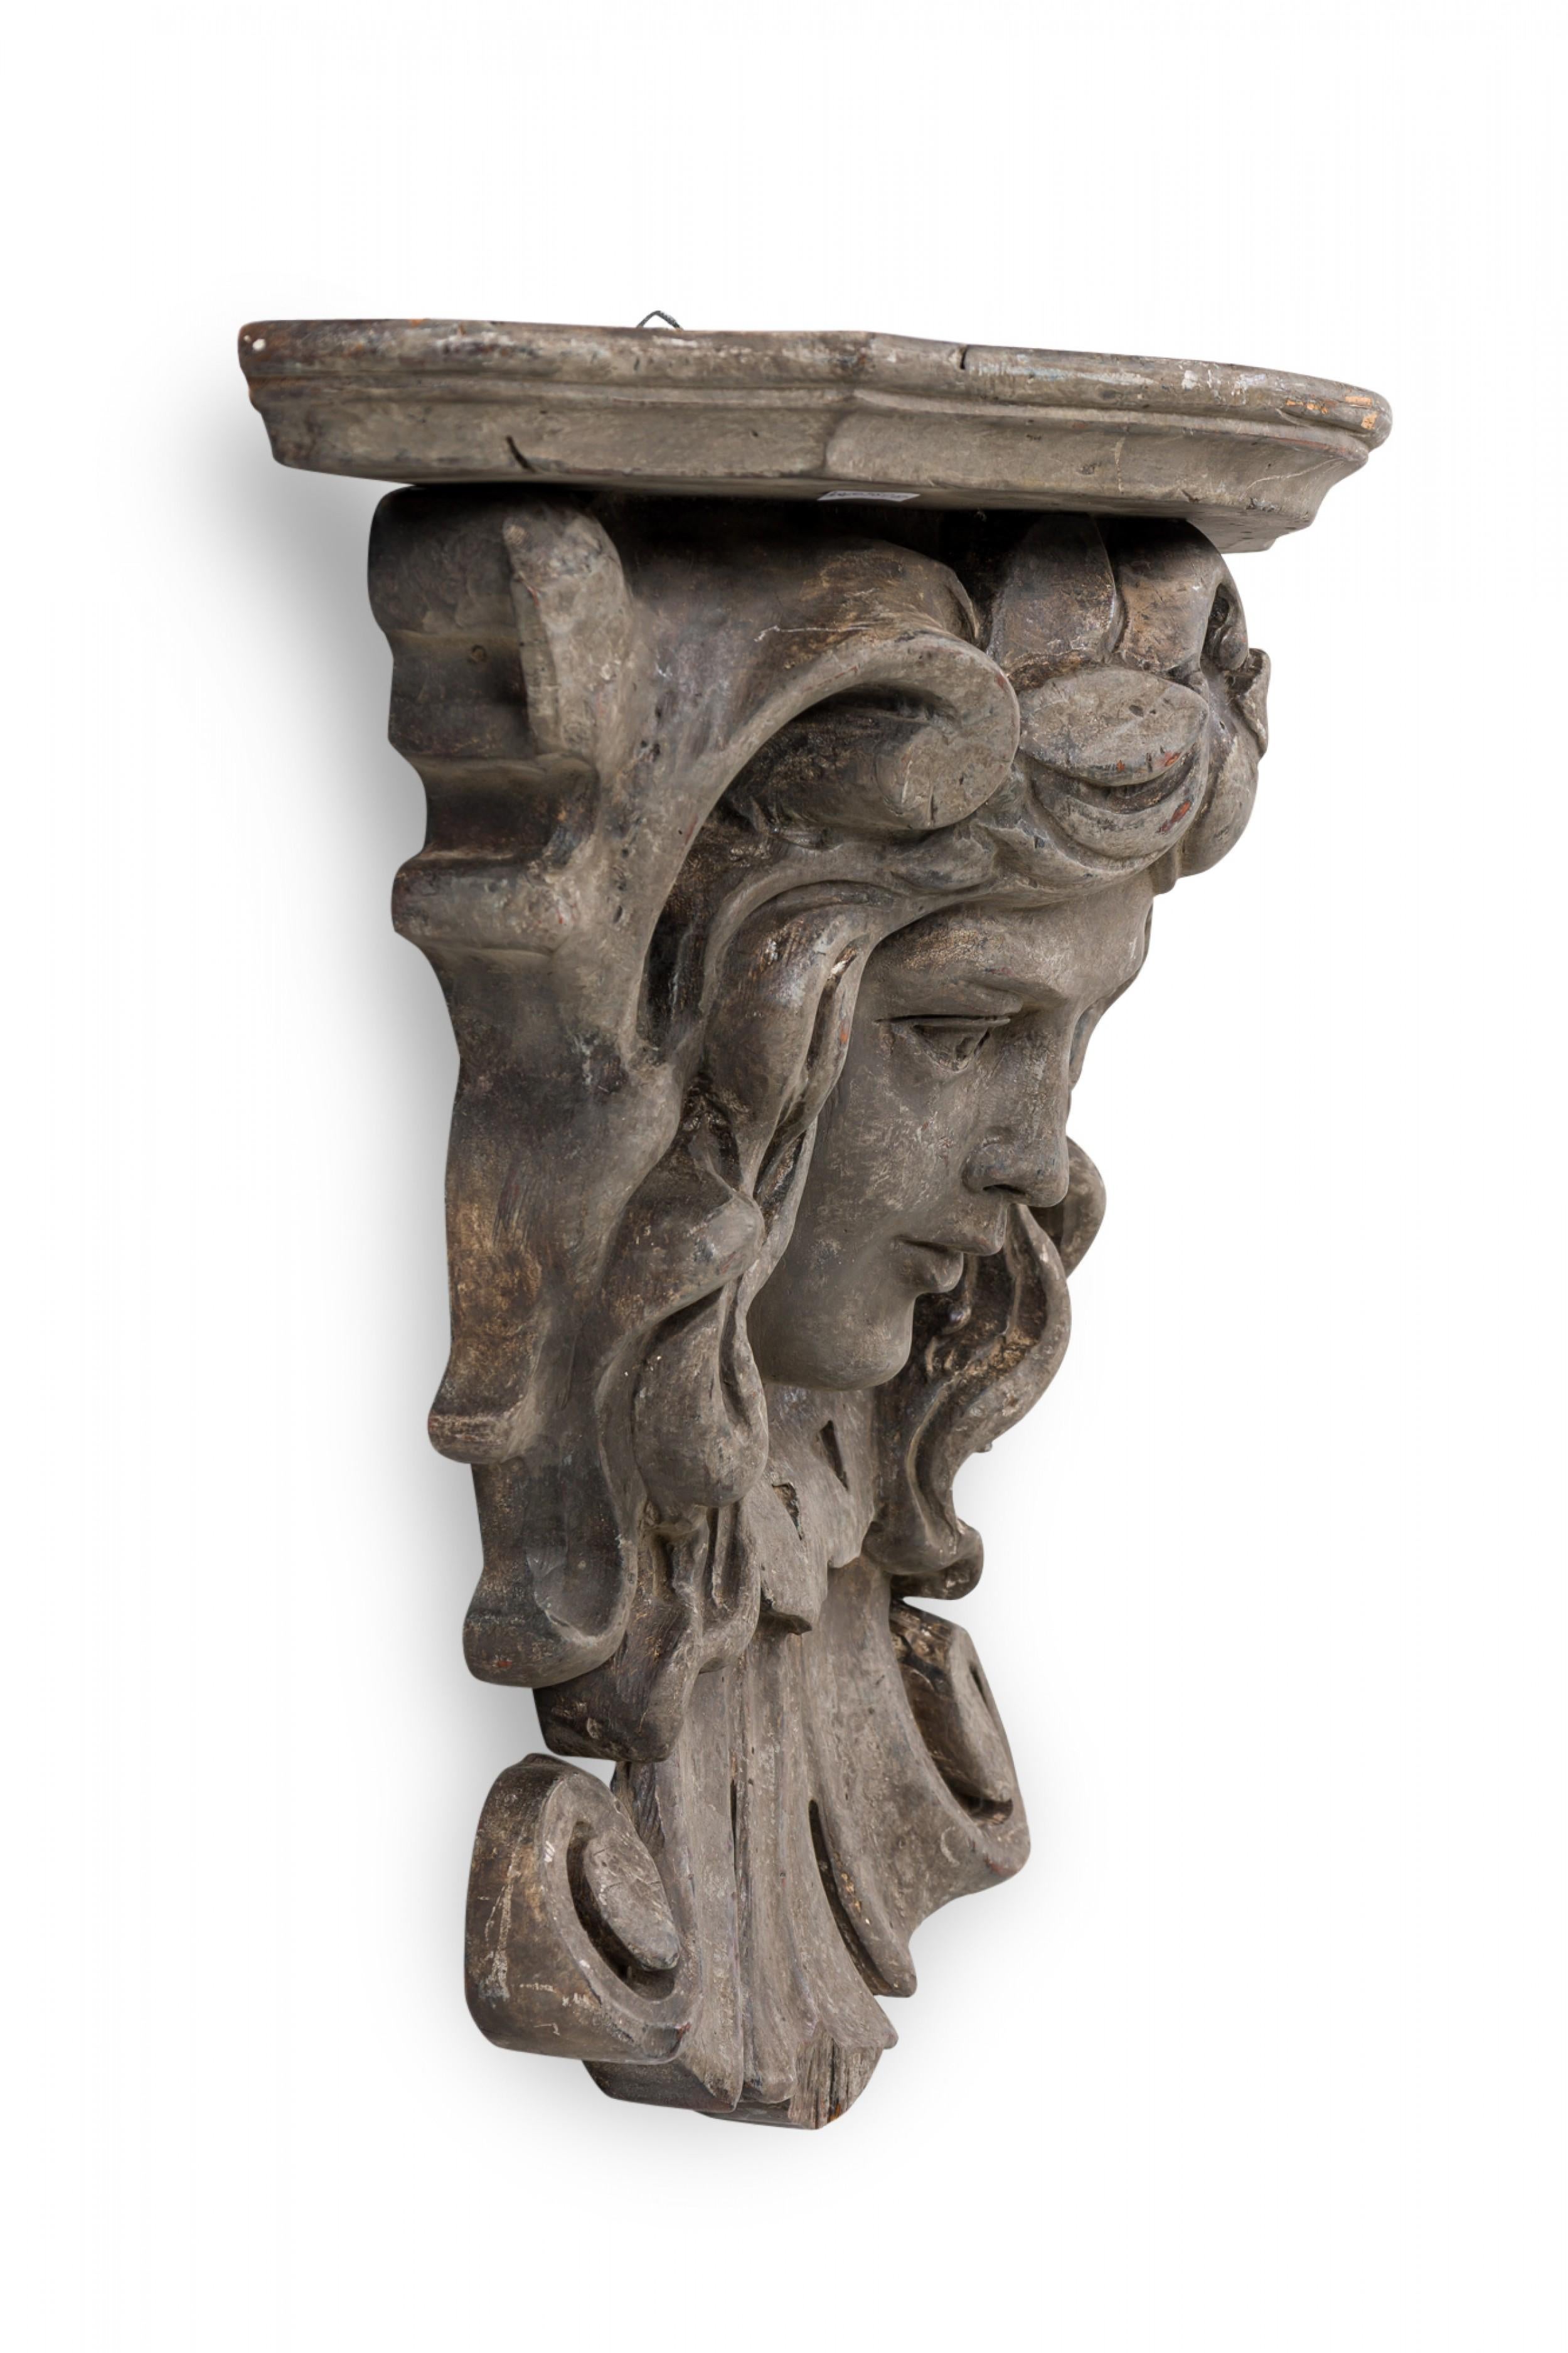 Italian Rococo-style wooden wall bracket / shelf / architectural element featuring a carved face below an upper shelf with carved and shaped beveled edge, treated with a faux bois painted finish.